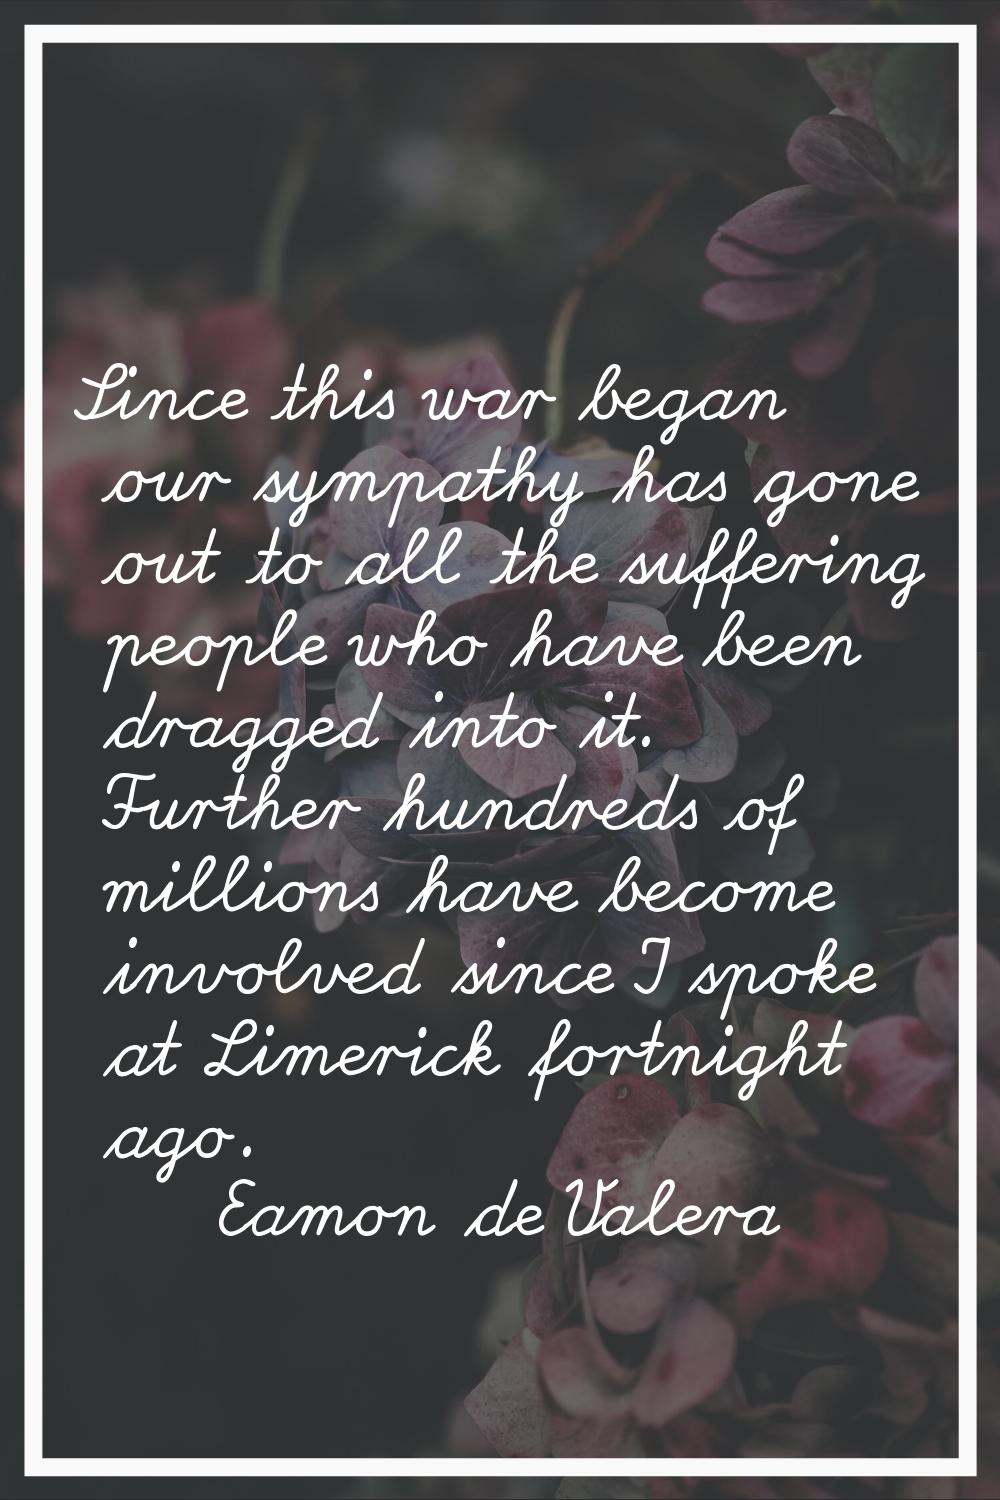 Since this war began our sympathy has gone out to all the suffering people who have been dragged in